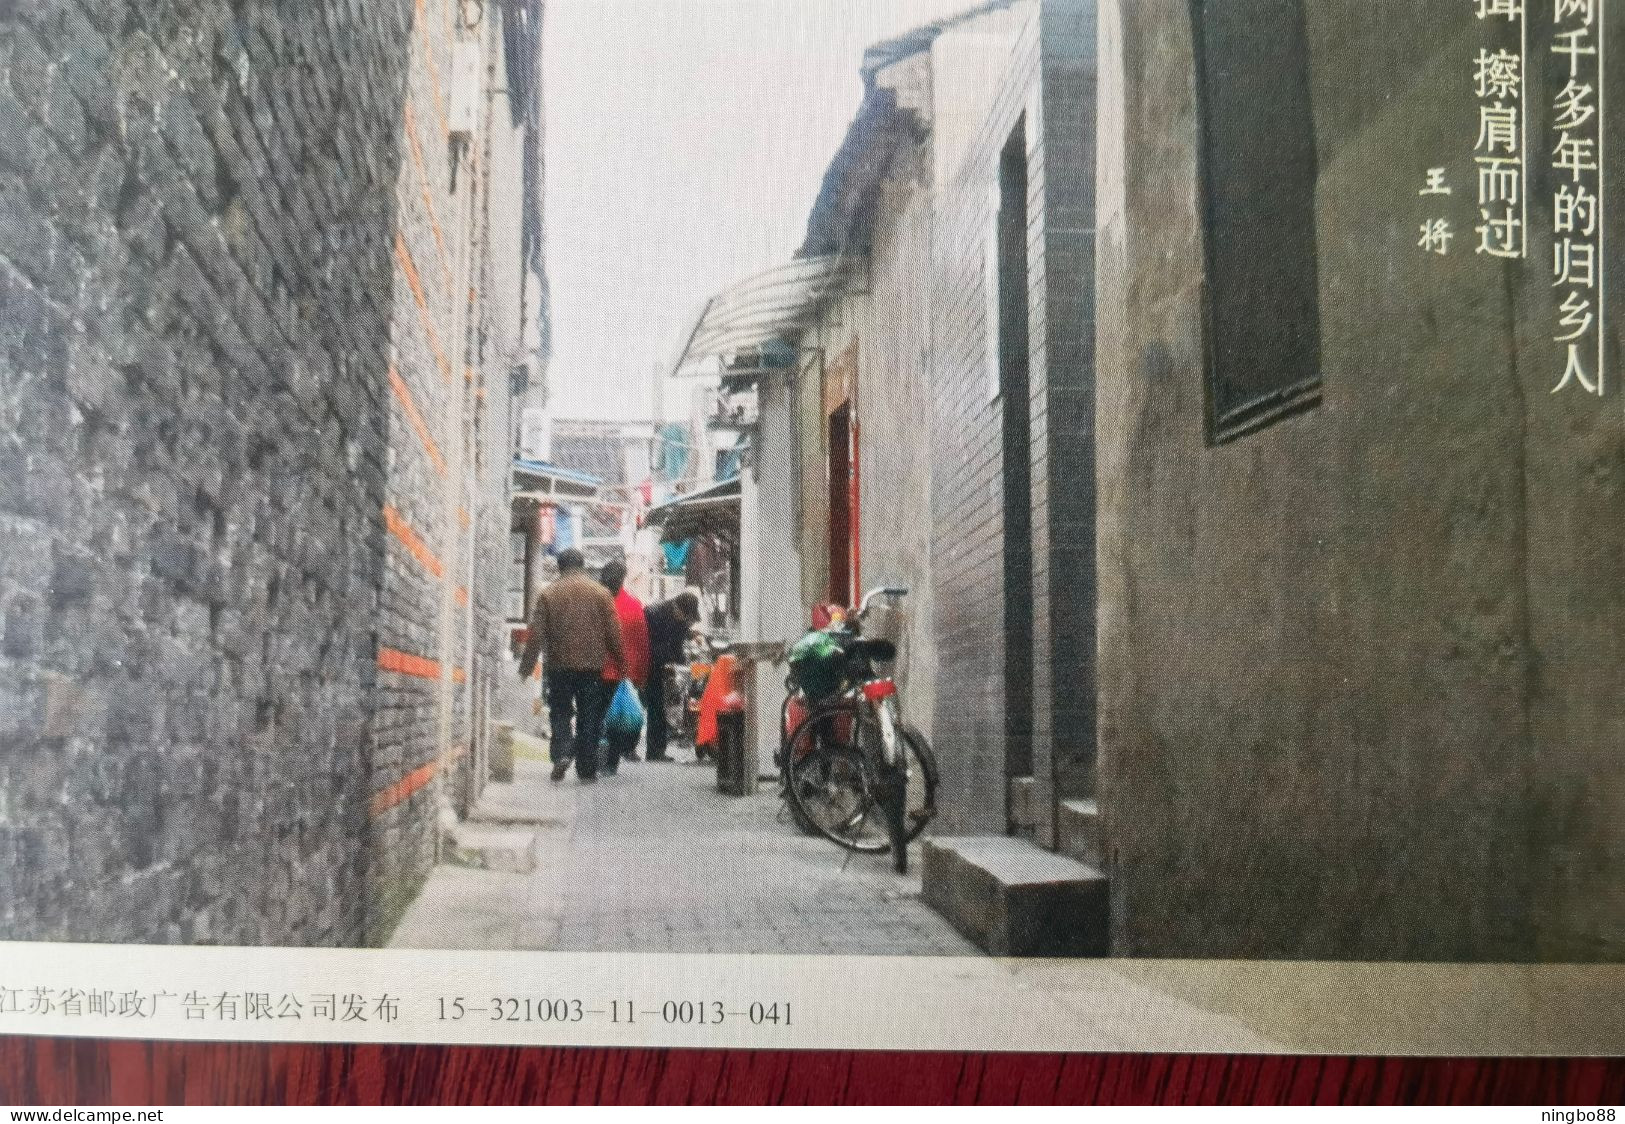 Street Bicycle Parking,bike,China 2015 Grand Canal Dongguan Ancient Ferry UNESCO World Heritage Pre-stamped Card - Radsport